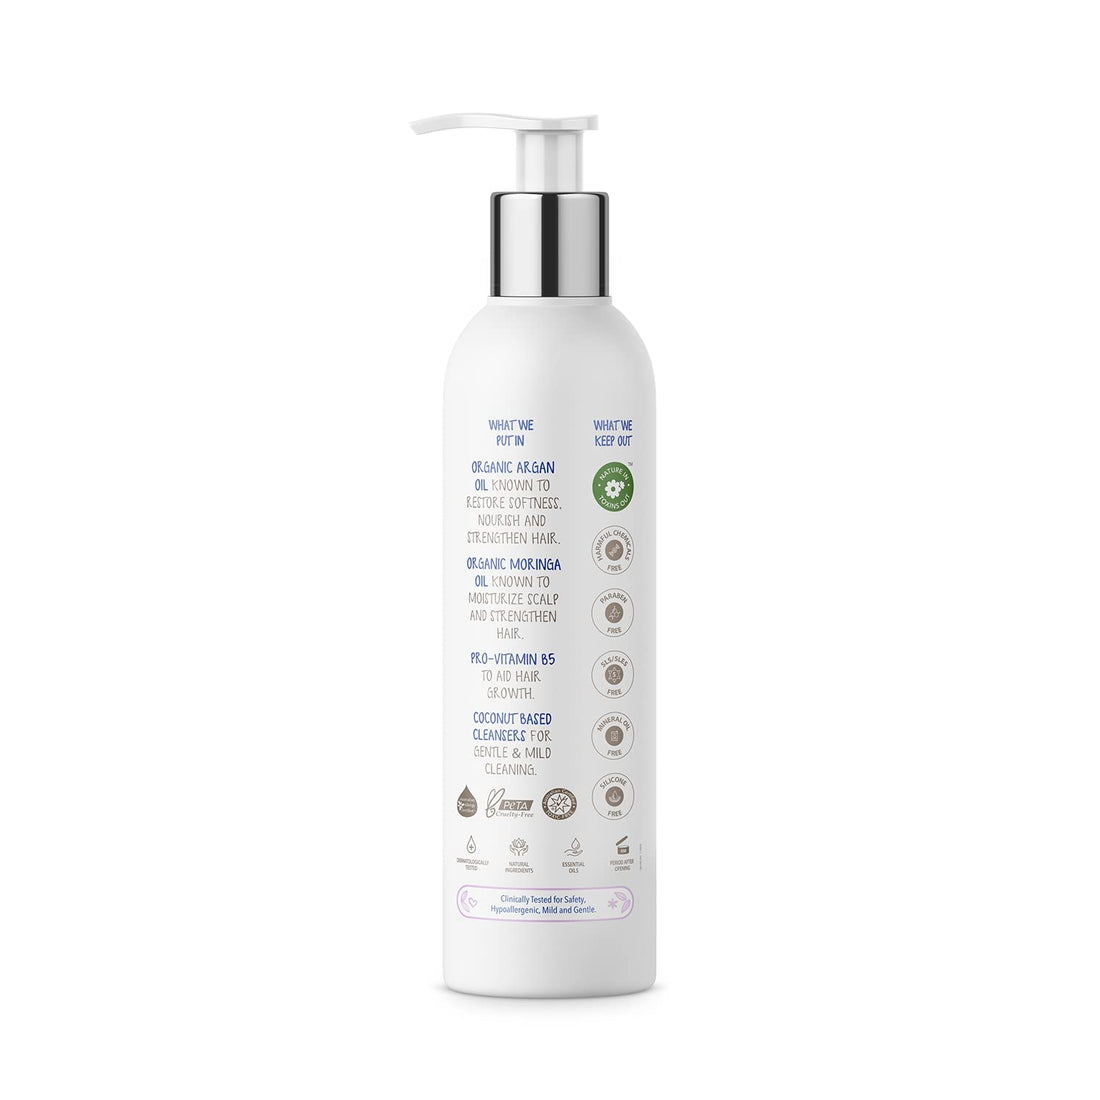 The Moms Co Natural Baby Shampoo With Oragnic Aragan oil 200ml